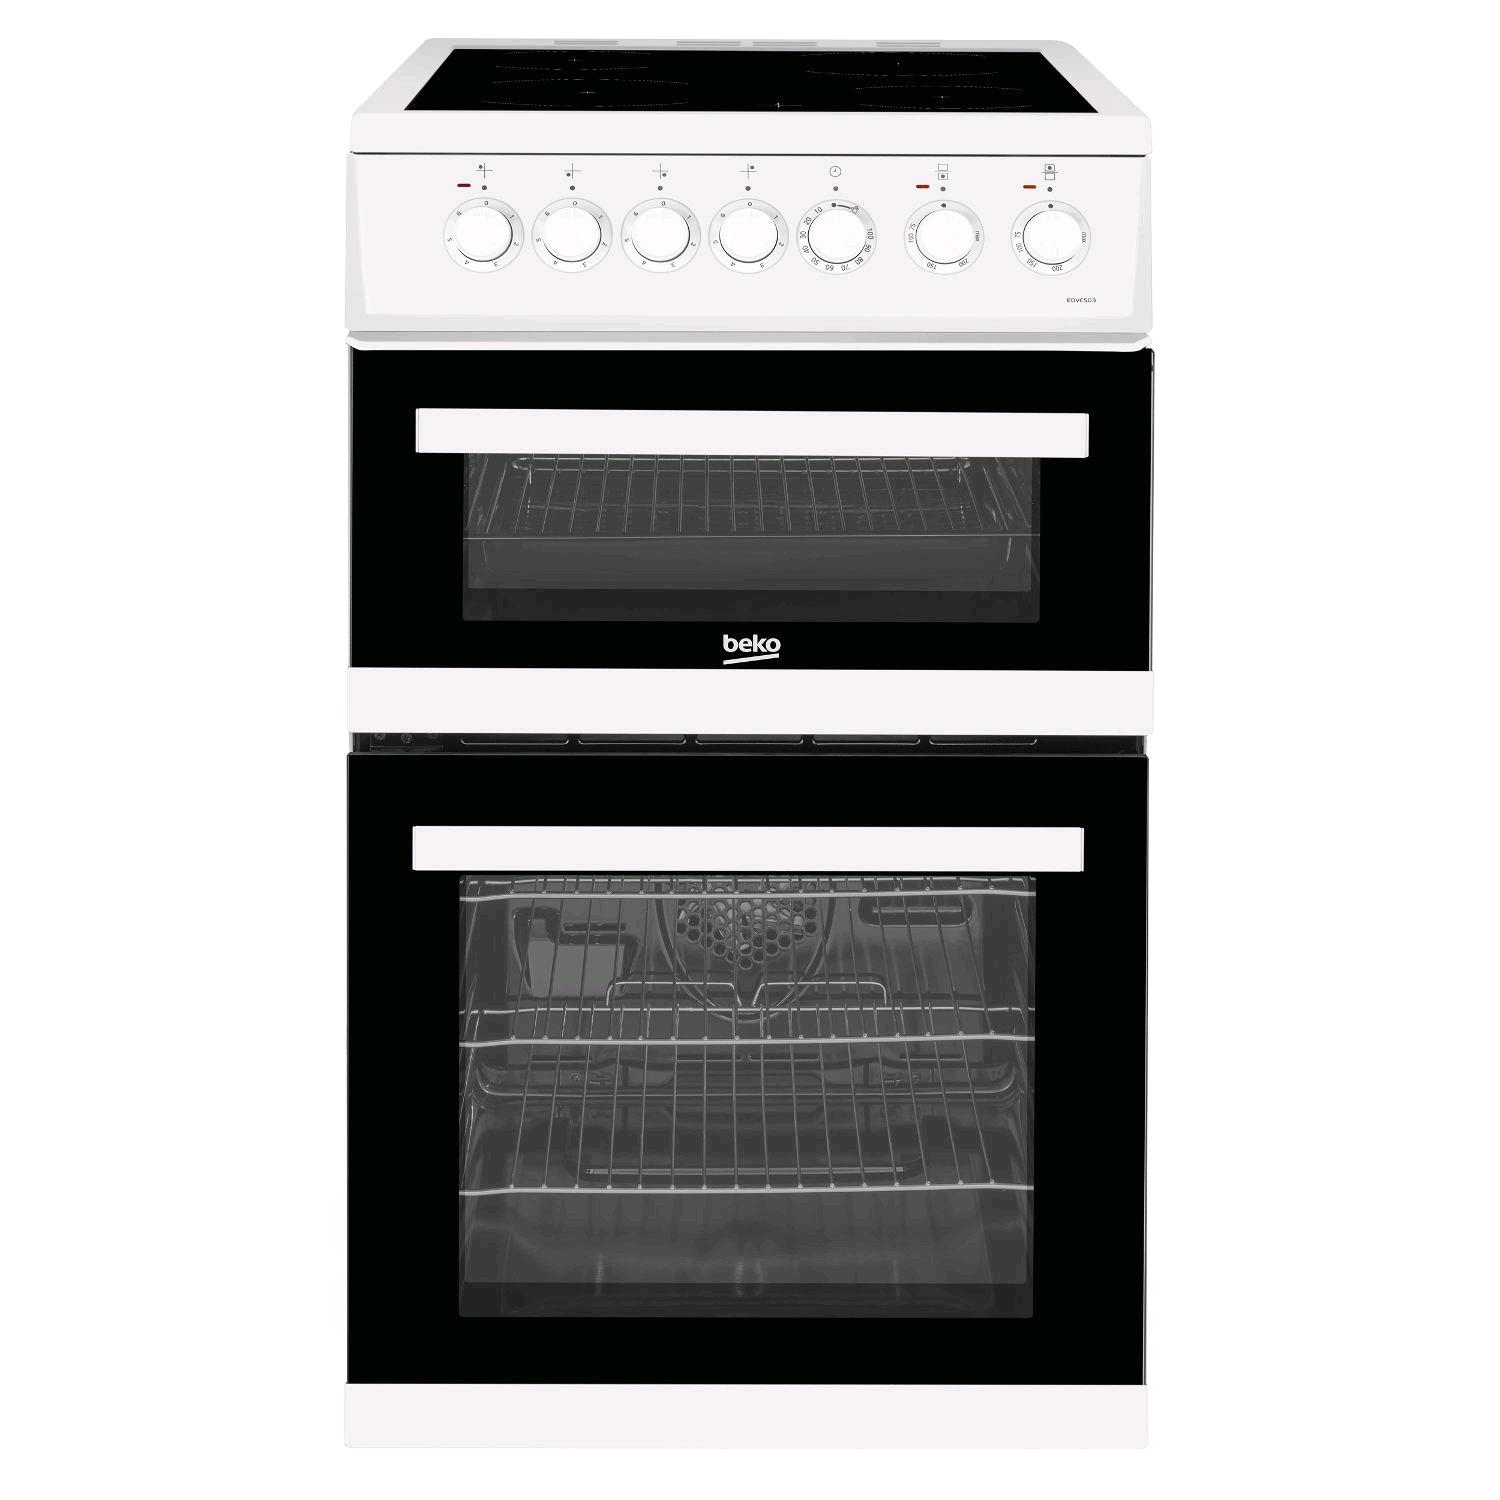 Beko Double Oven Ceramic Cooker White 50cm wide A Rated